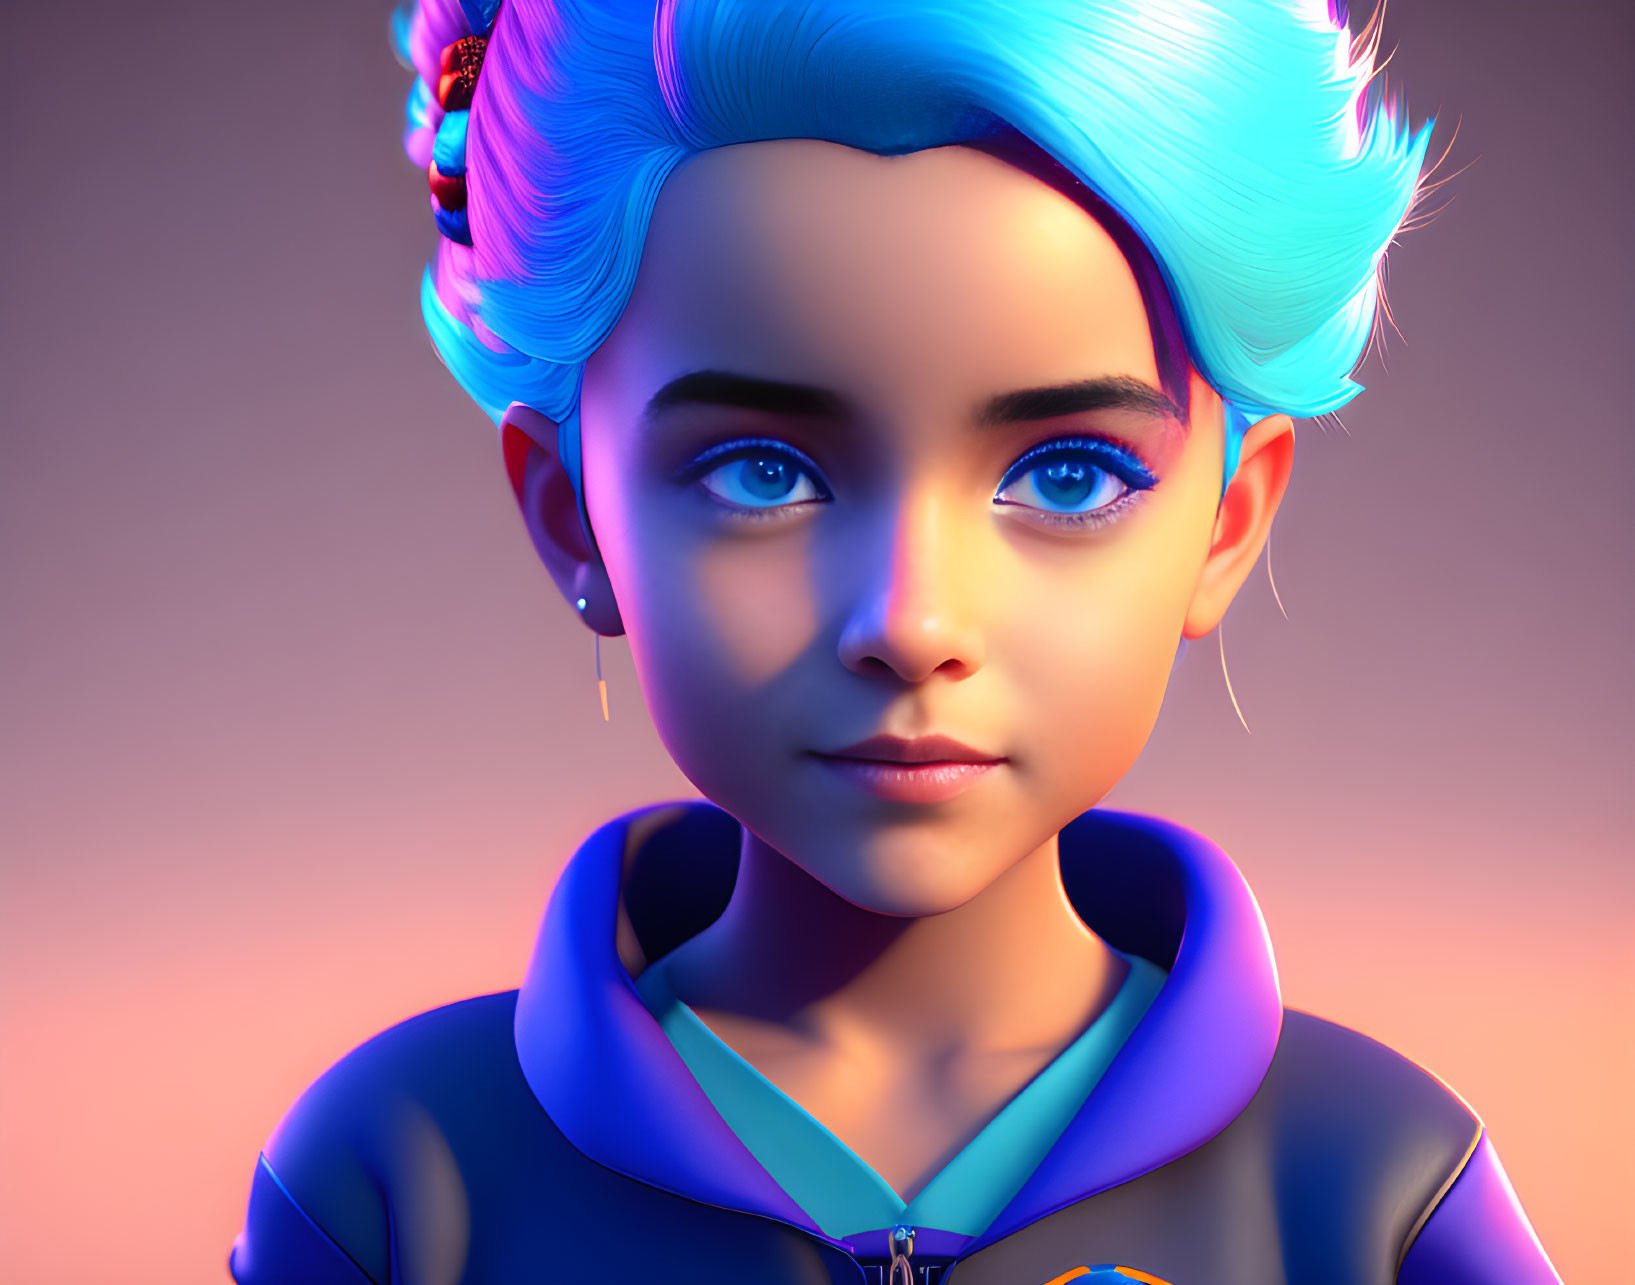 Child with Vibrant Blue Hair and Blue Eyes Against Gradient Background